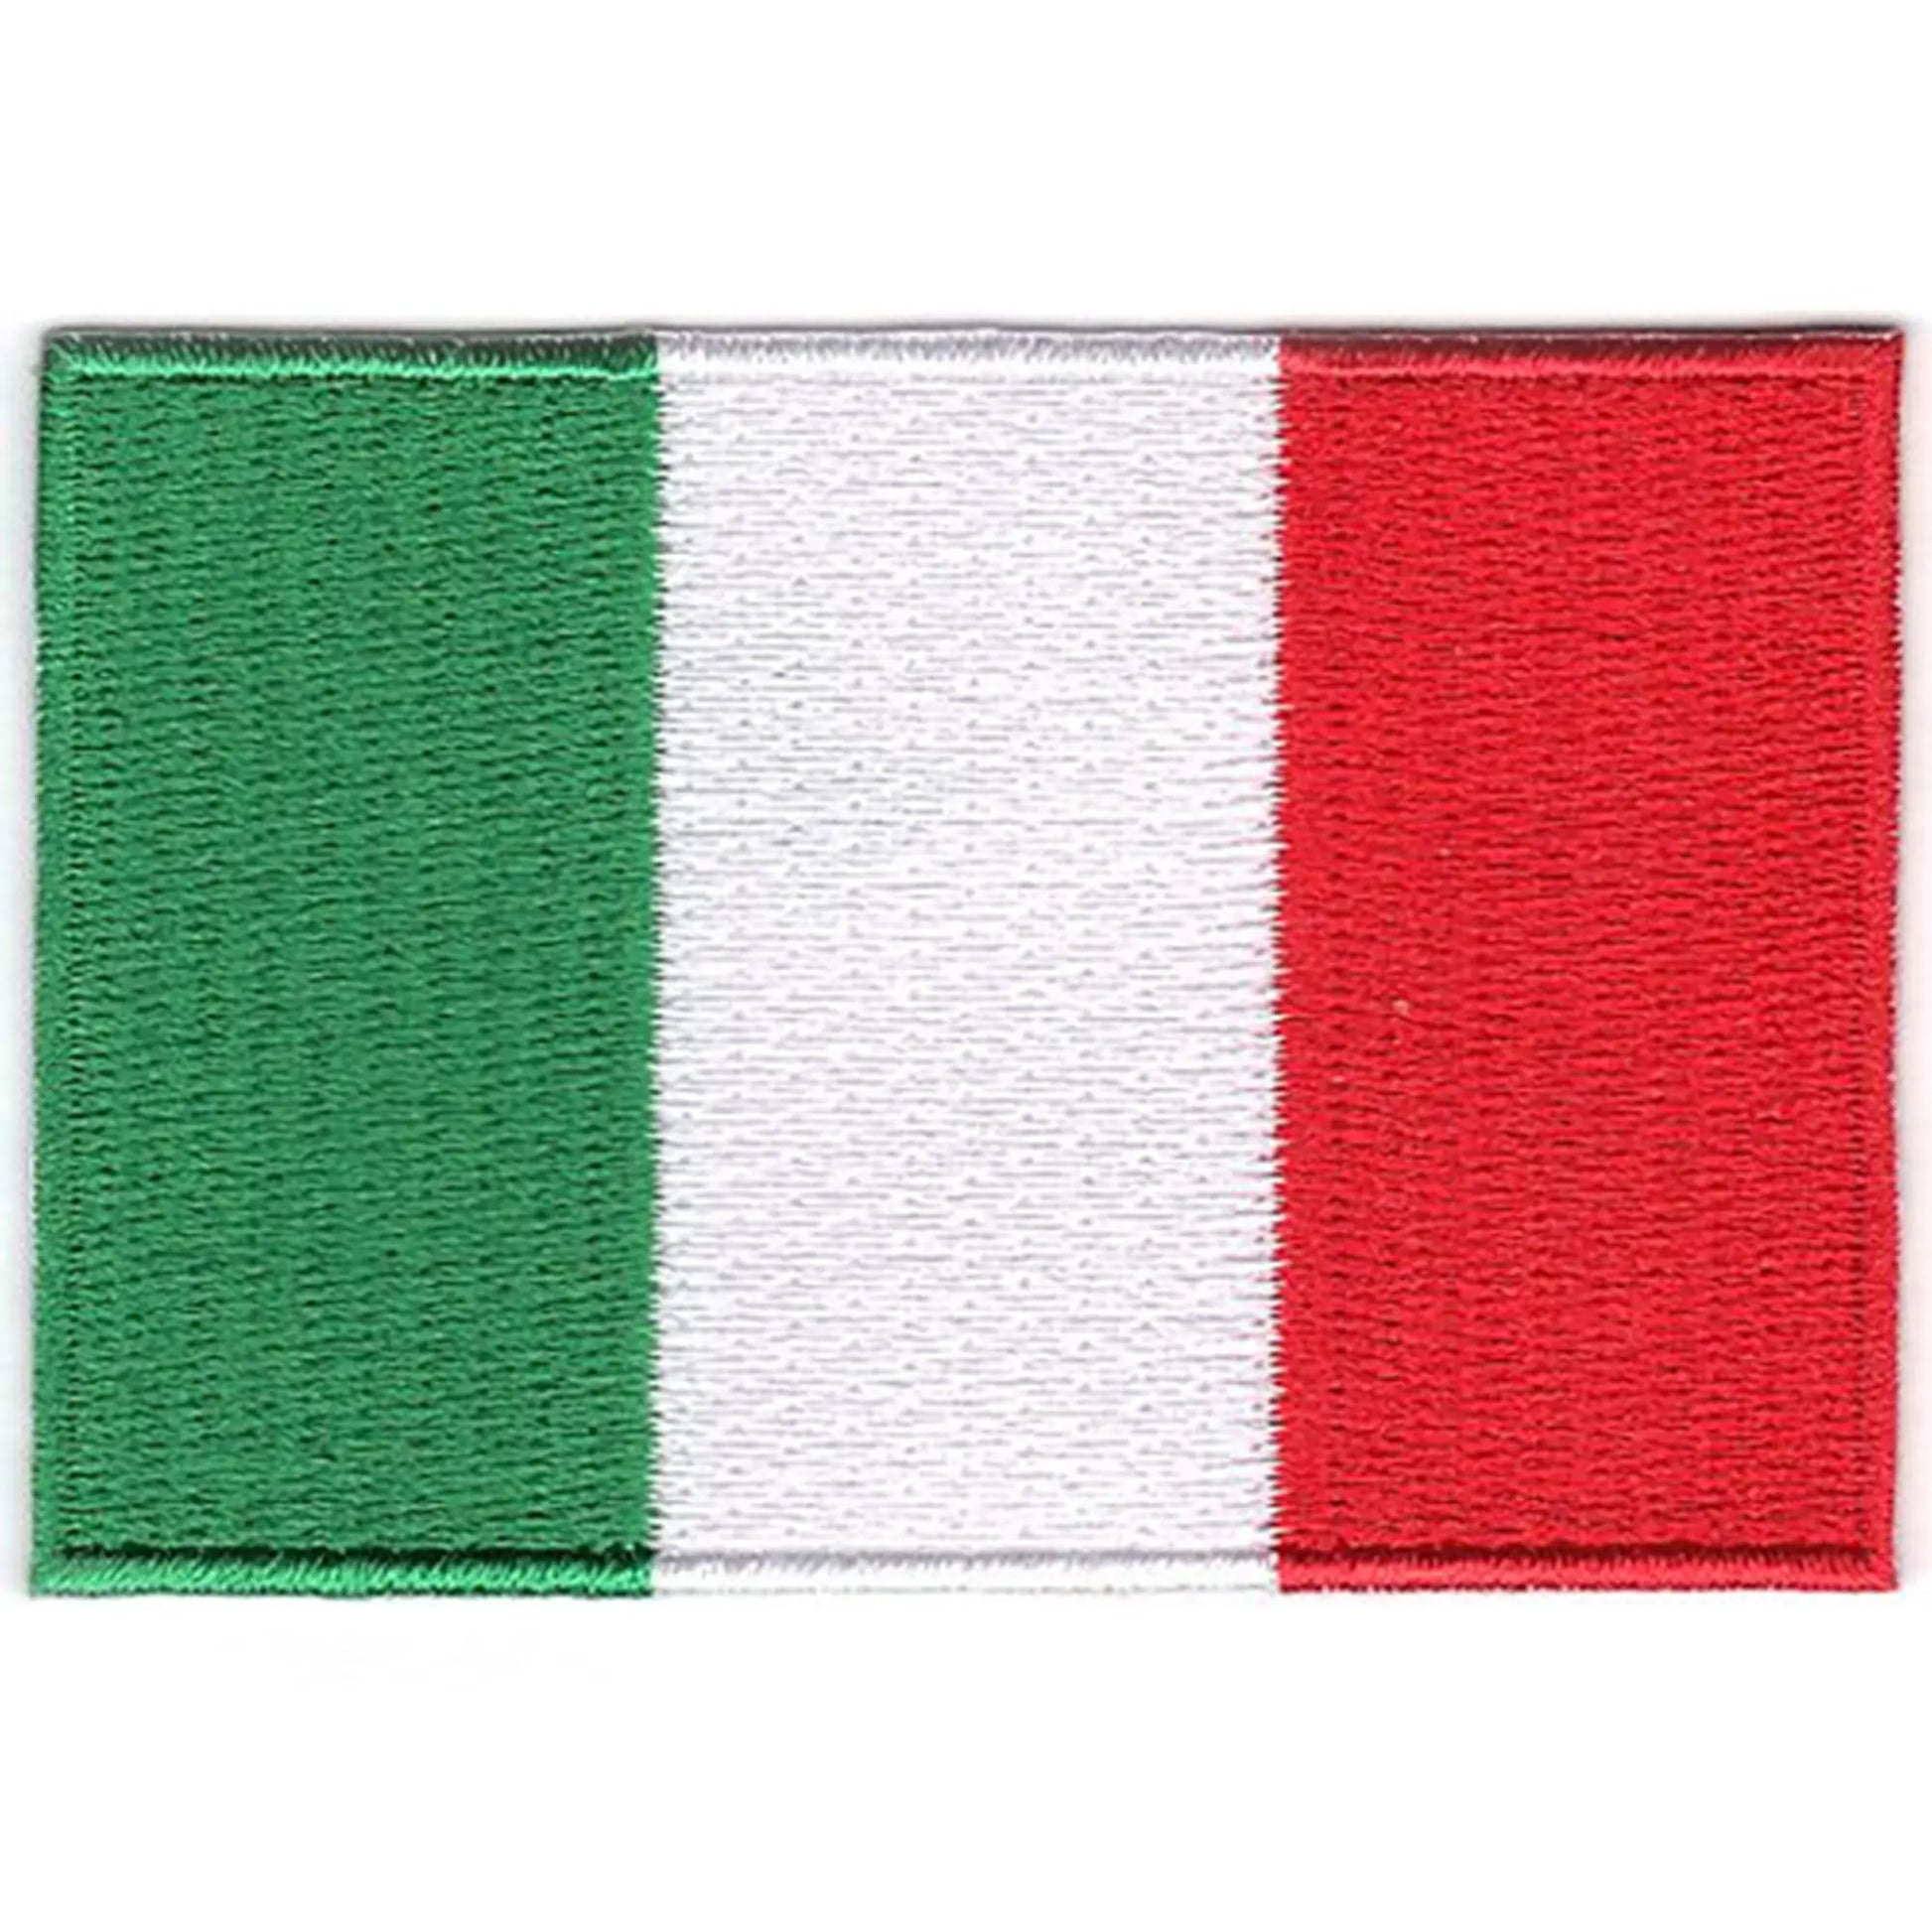 Italy Embroidered Country Flag Patch